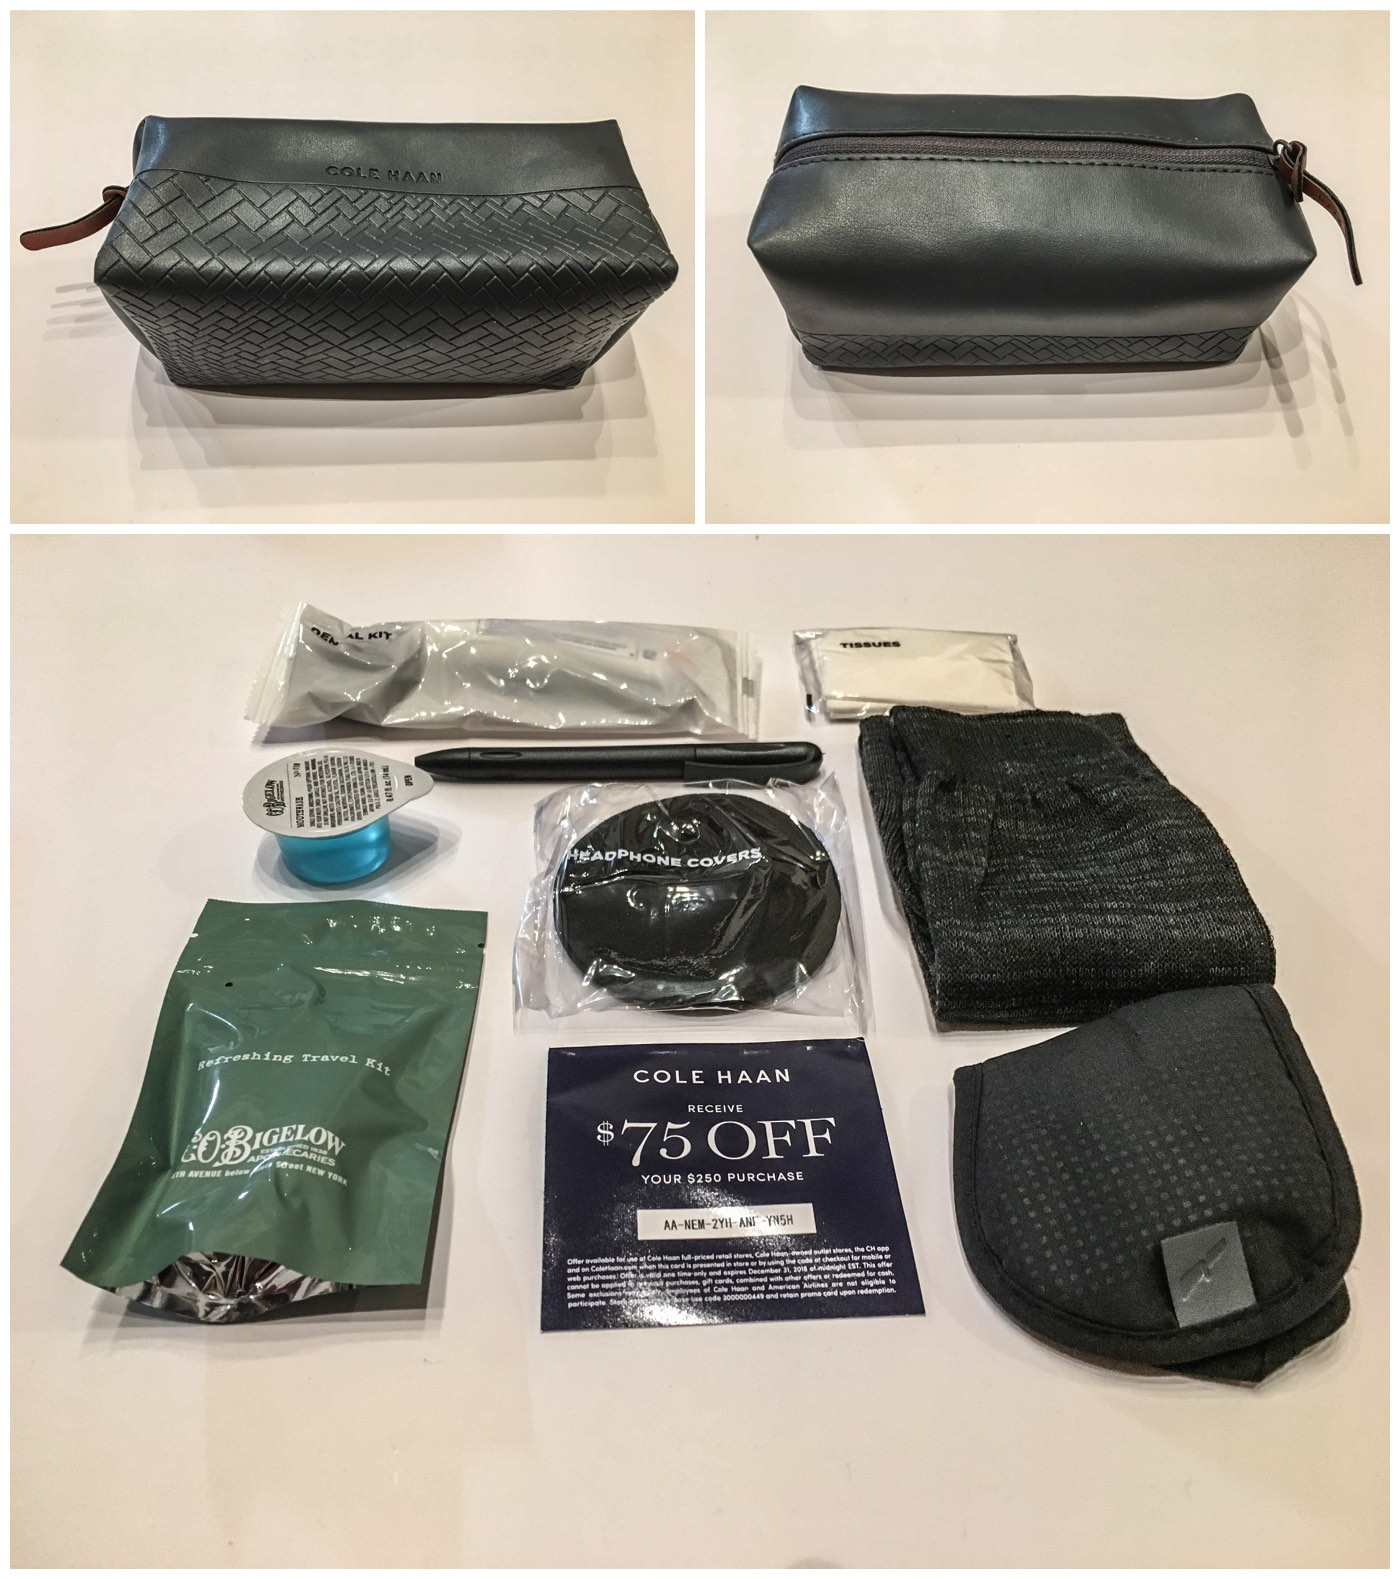 American Airlines international business class amenity kit